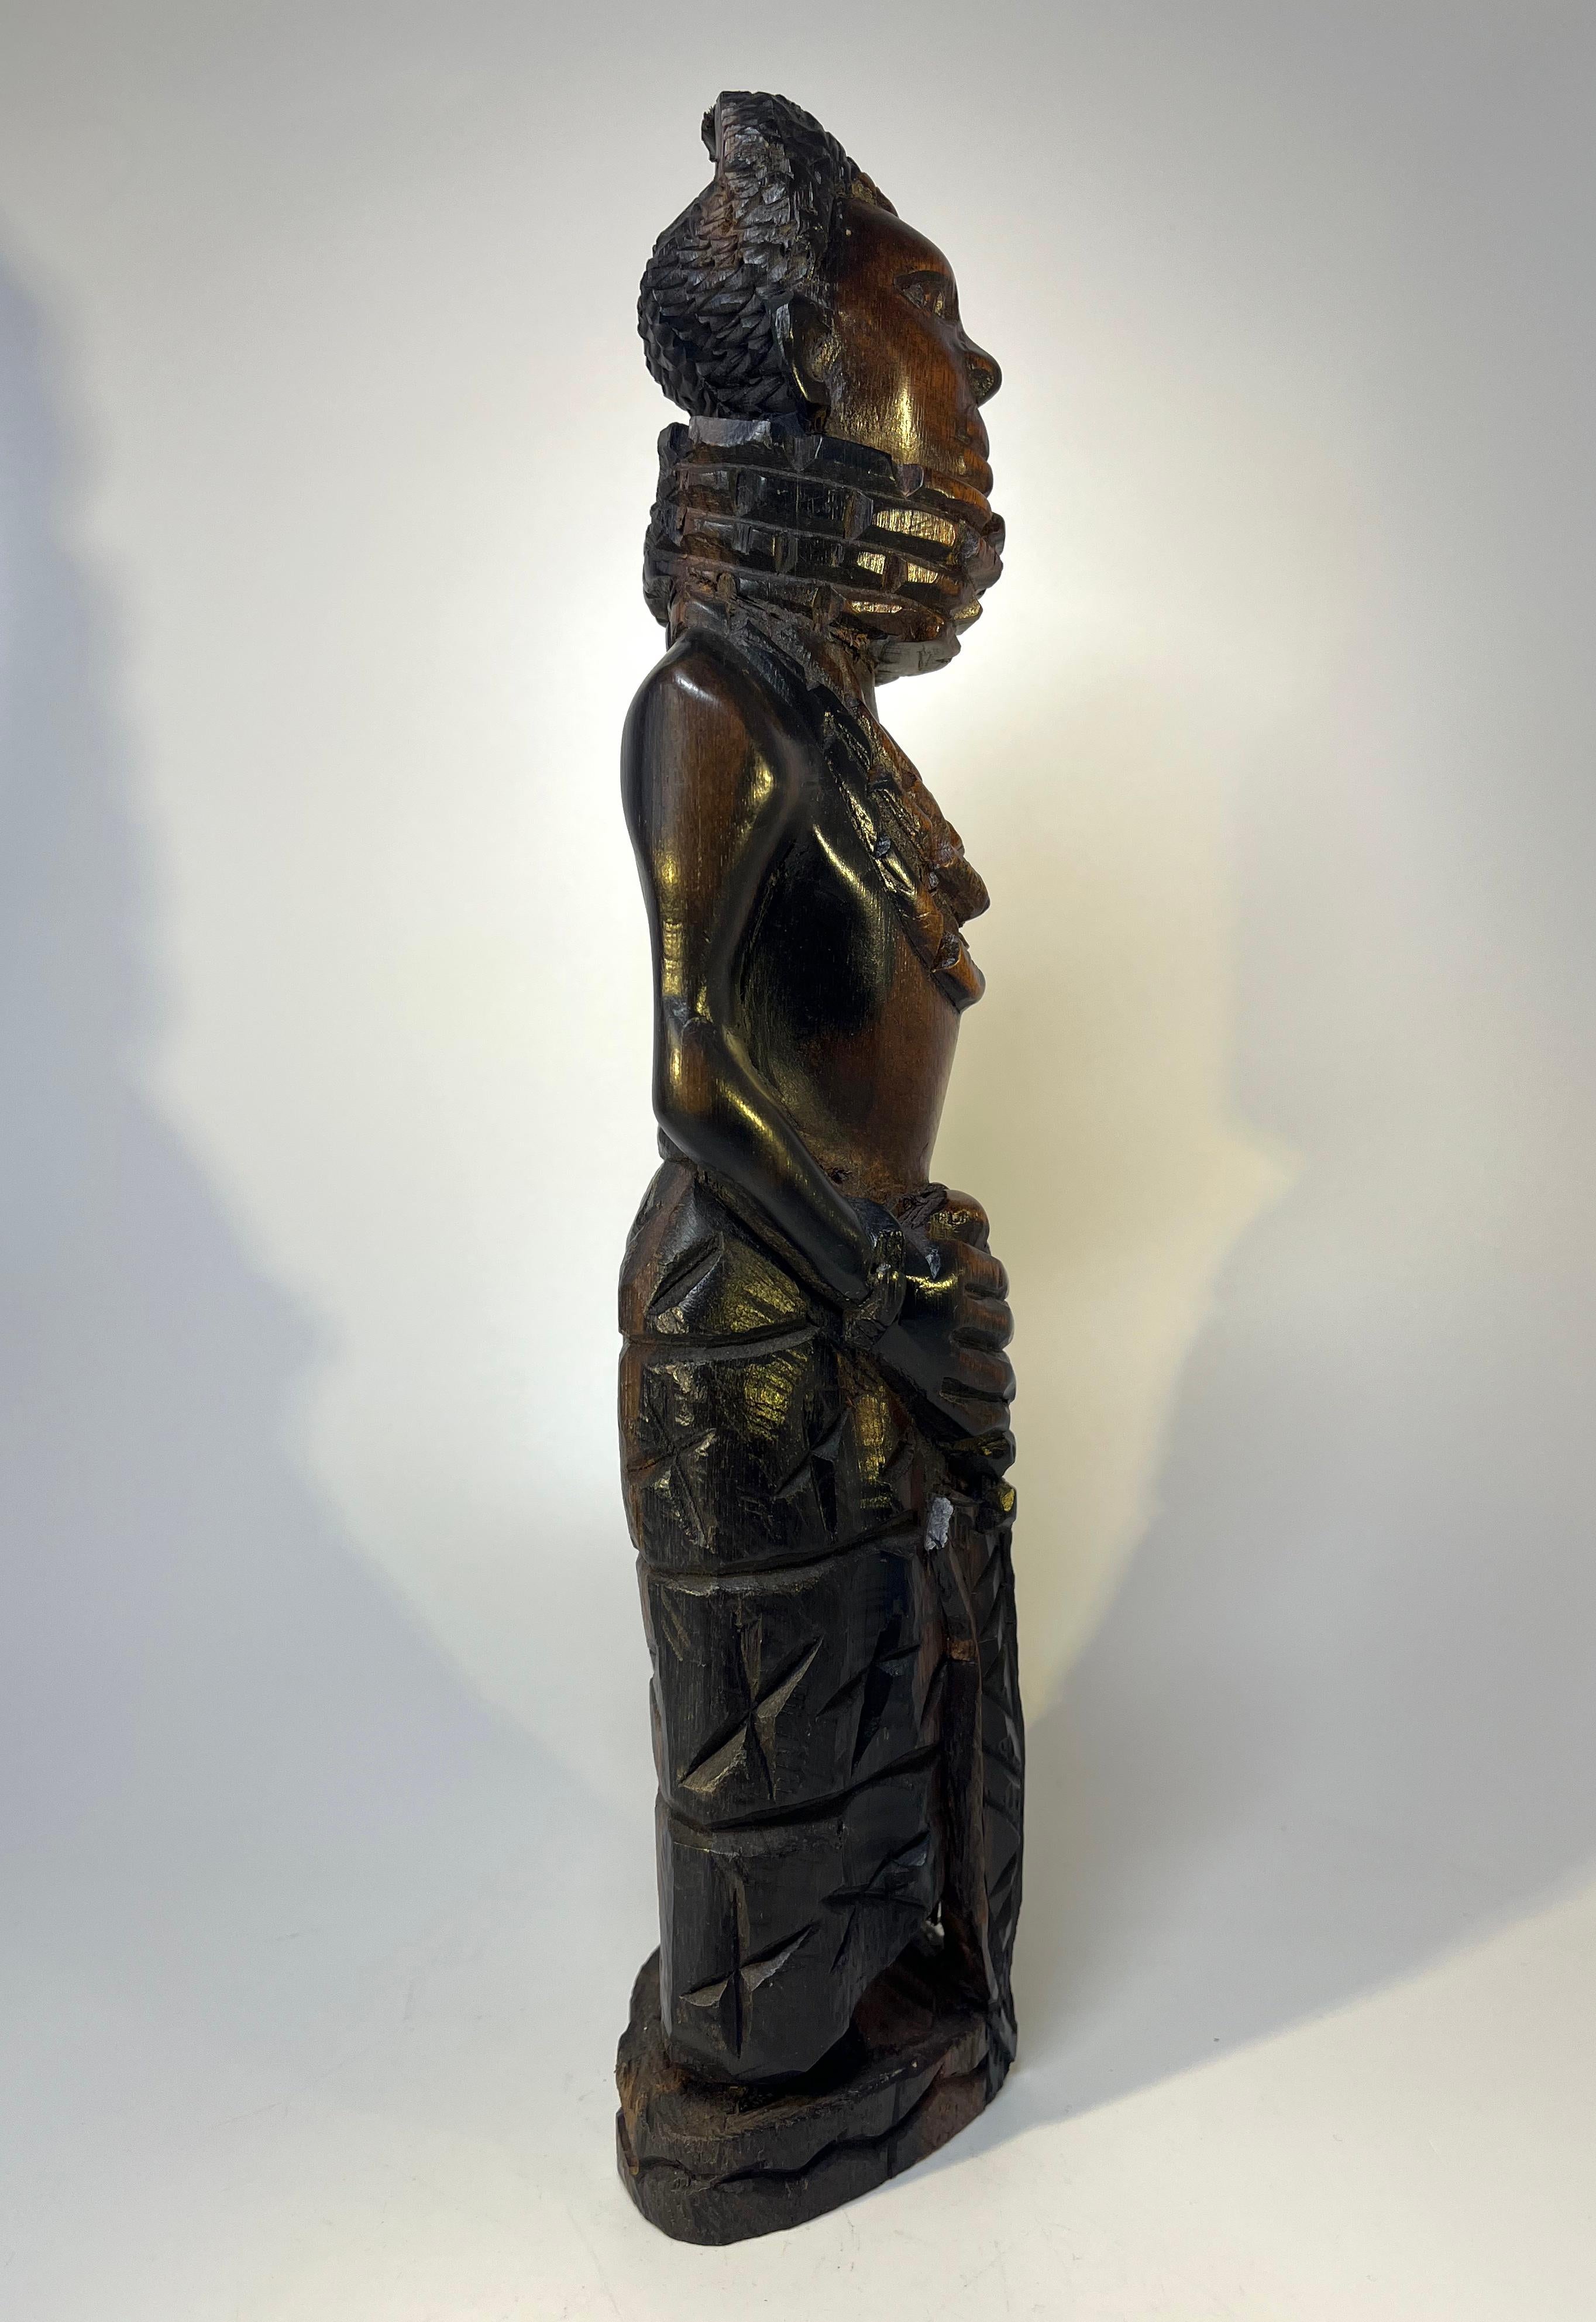 Benin Kingdom Ebony Carving of a Young King Oba, Nigerian For Sale 2